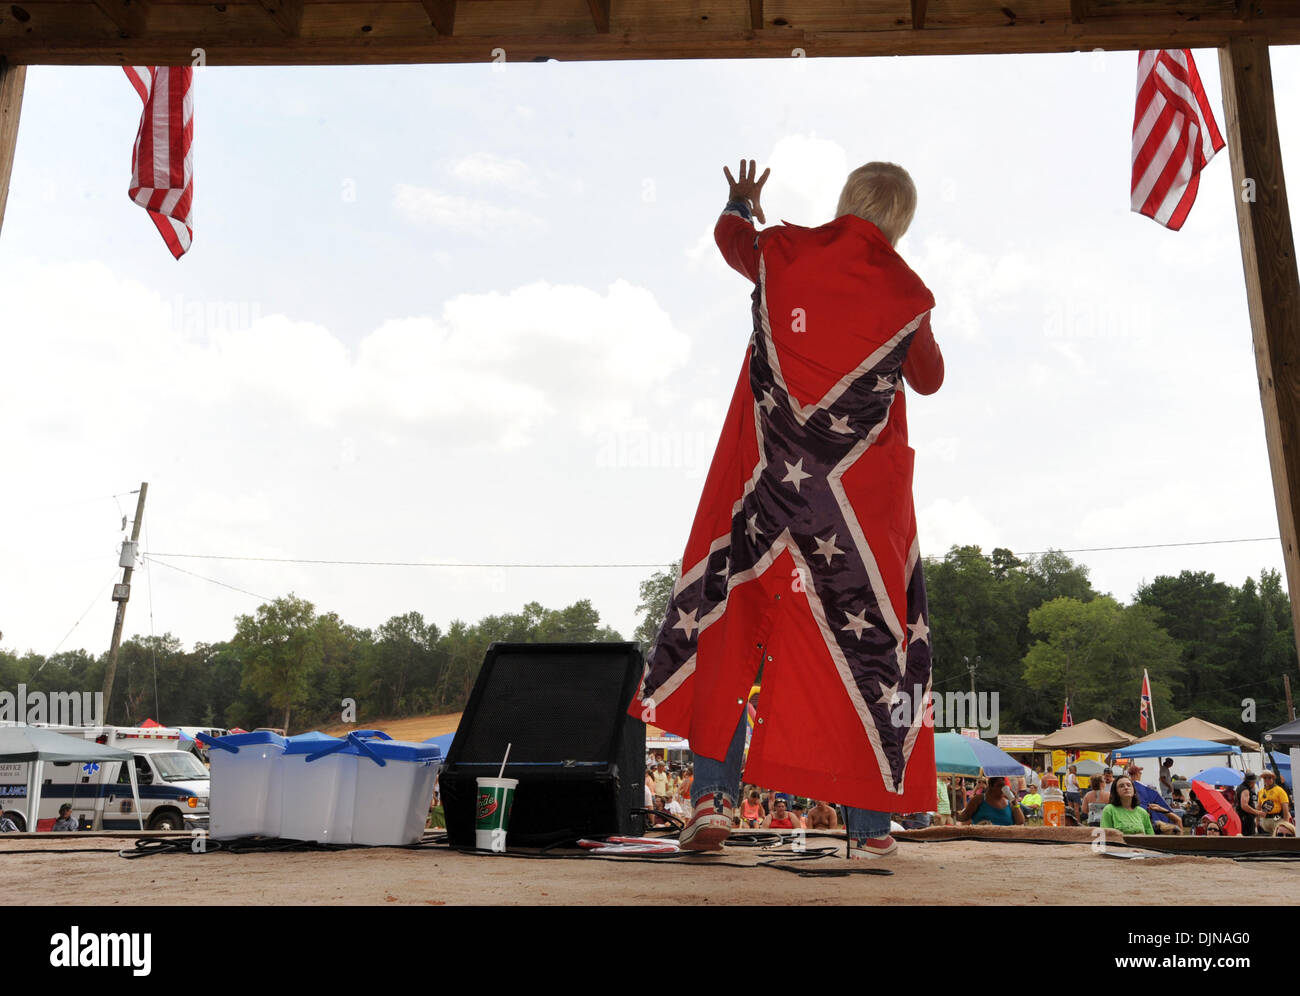 Mar 11, 2008 - East Dublin, Georgia, USA - Ronnie Mullis sports a Confederate Battle flag cape while performing at the 13th annual Summer Redneck Games at Buckeye Park in East Dublin, Georgia, on Saturday. The annual homage to Southerners, began as a spoof to the 1996 Summer Olympics in Atlanta. Thousands of revelers attend the event whose events include bobbing for pigs feet, the  Stock Photo